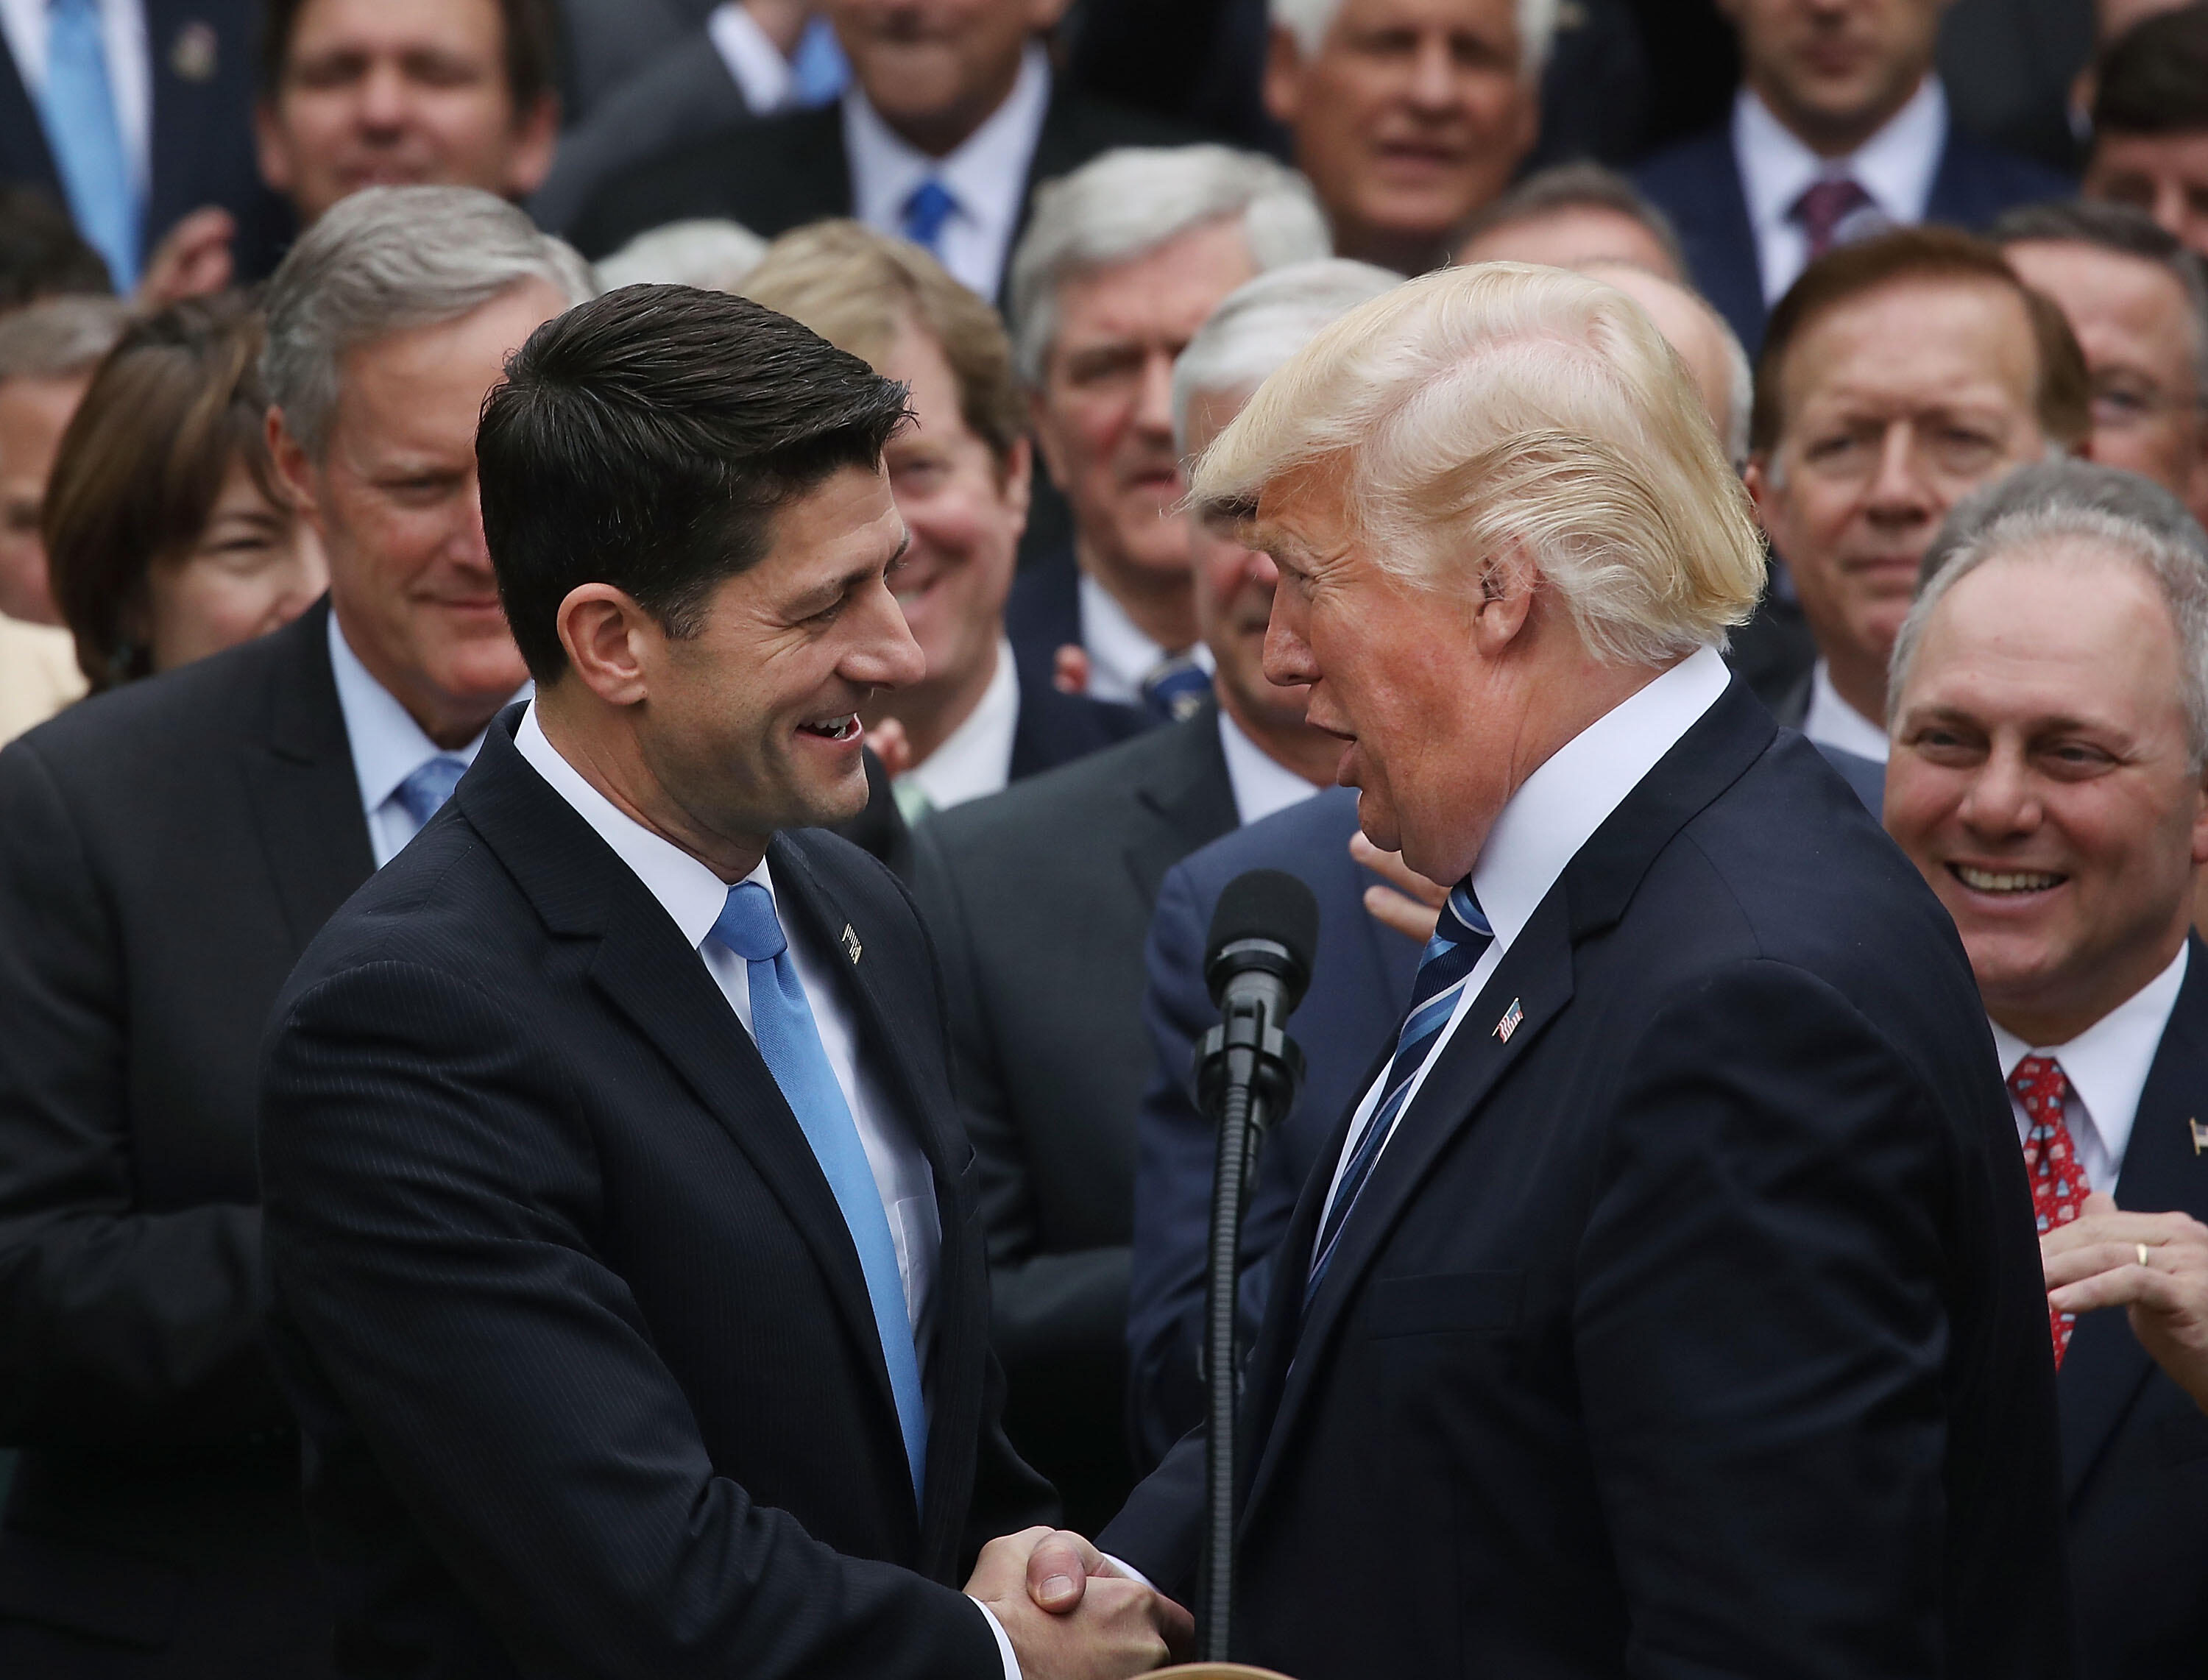 WASHINGTON, DC - MAY 04:  U.S. President Donald Trump (R) congratulates House Speaker Paul Ryan (R-WI) after Republicans passed legislation aimed at repealing and replacing ObamaCare, during an event in the Rose Garden at the White House, on May 4, 2017 i